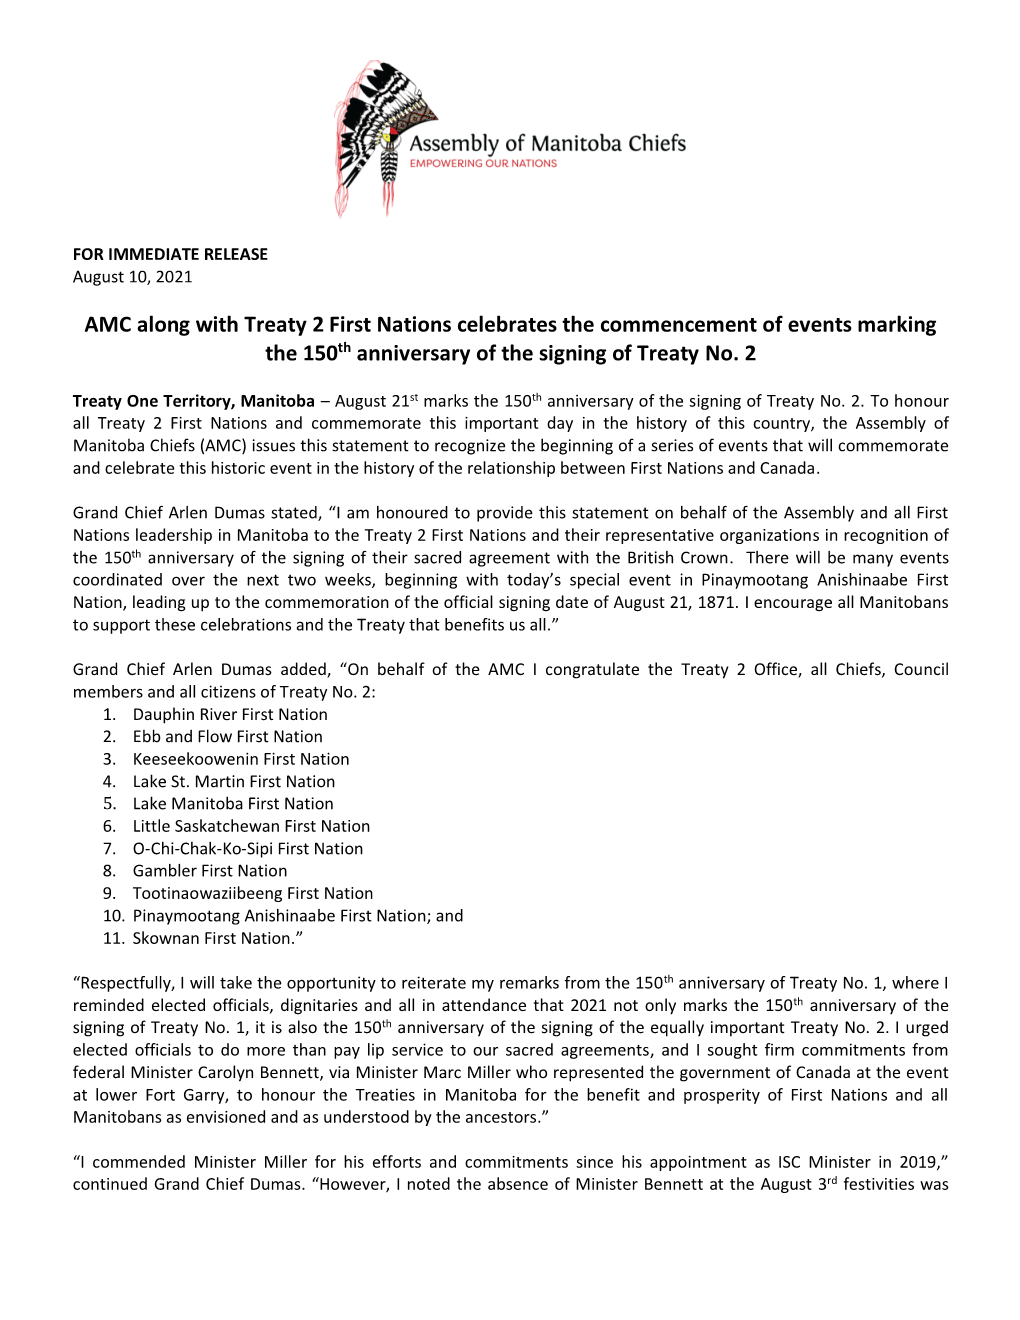 AMC Along with Treaty 2 First Nations Celebrates the Commencement of Events Marking the 150Th Anniversary of the Signing of Treaty No